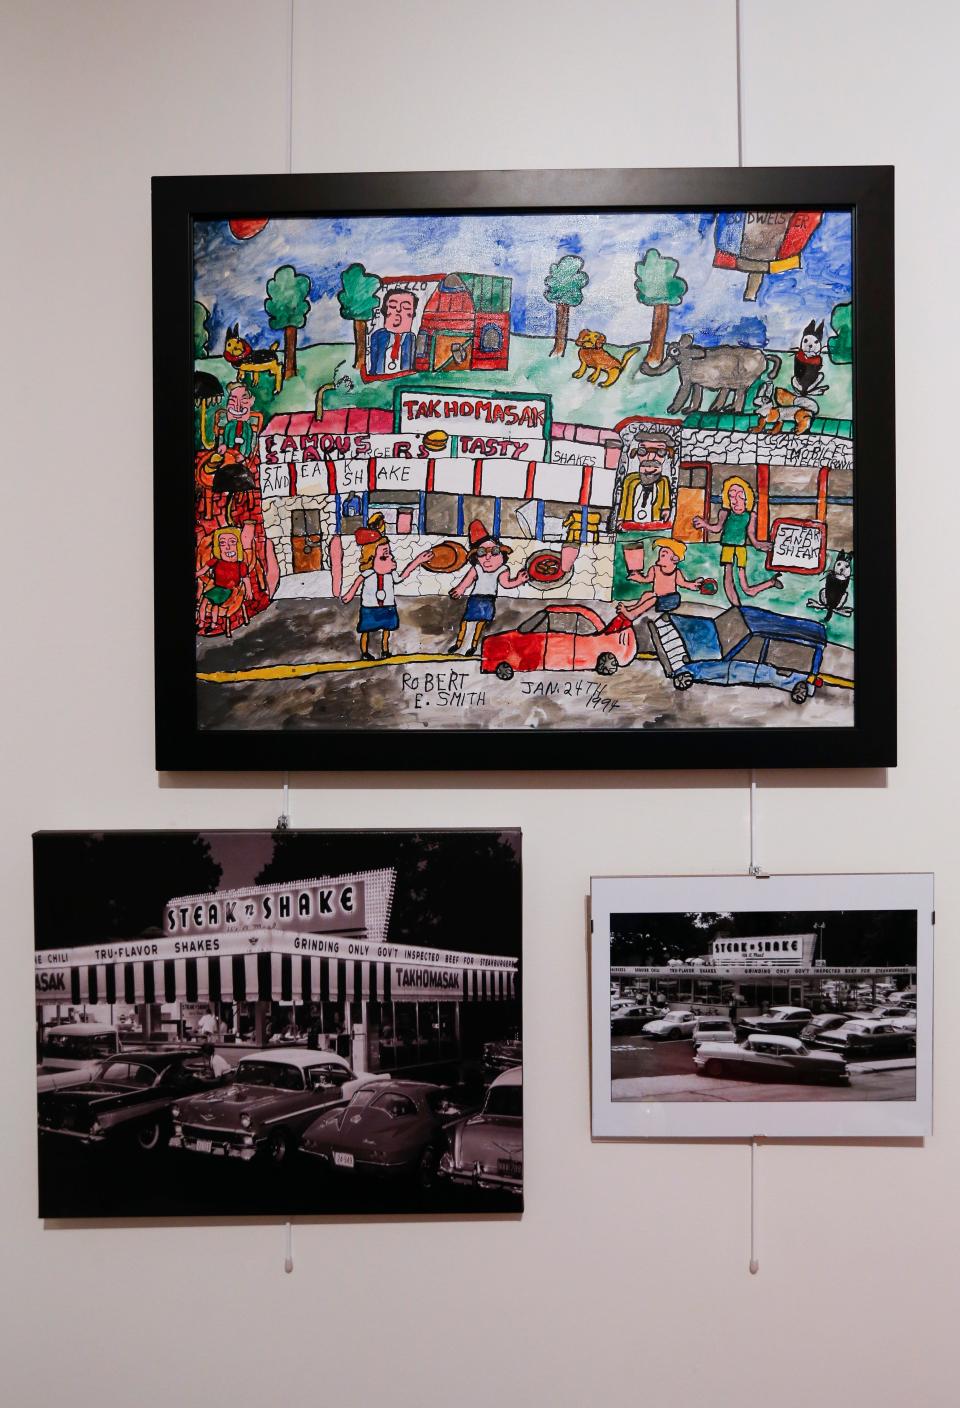 A Robert E. Smith painting of Steak 'n Shake is one of the pieces on exhibit at the History Museum on the Square's latest exhibit, "Order Up! The Restaurants of Route 66".